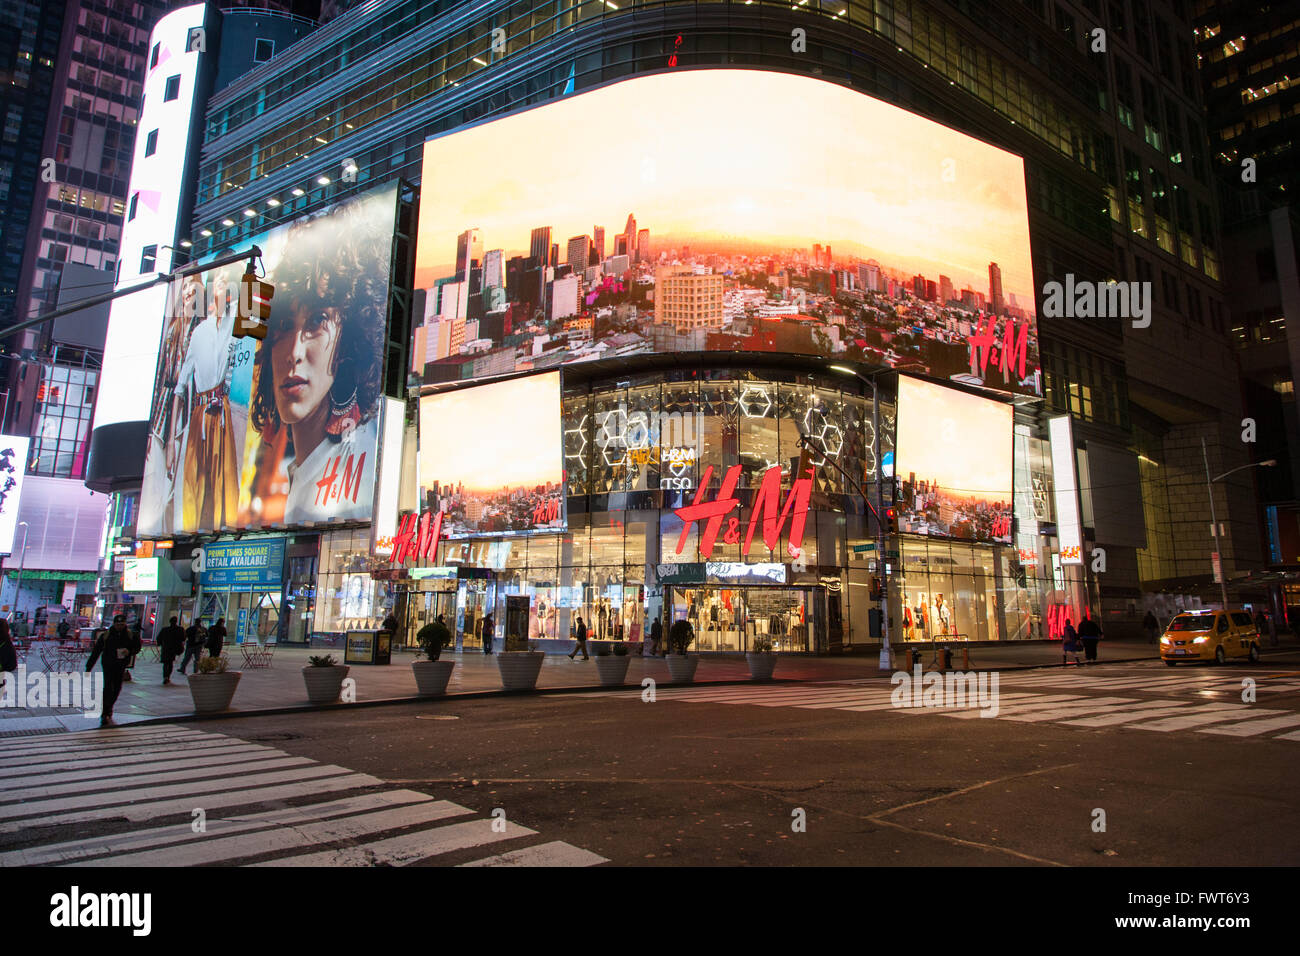 H&M store at night, Times Square, New York City, United States of America. Stock Photo